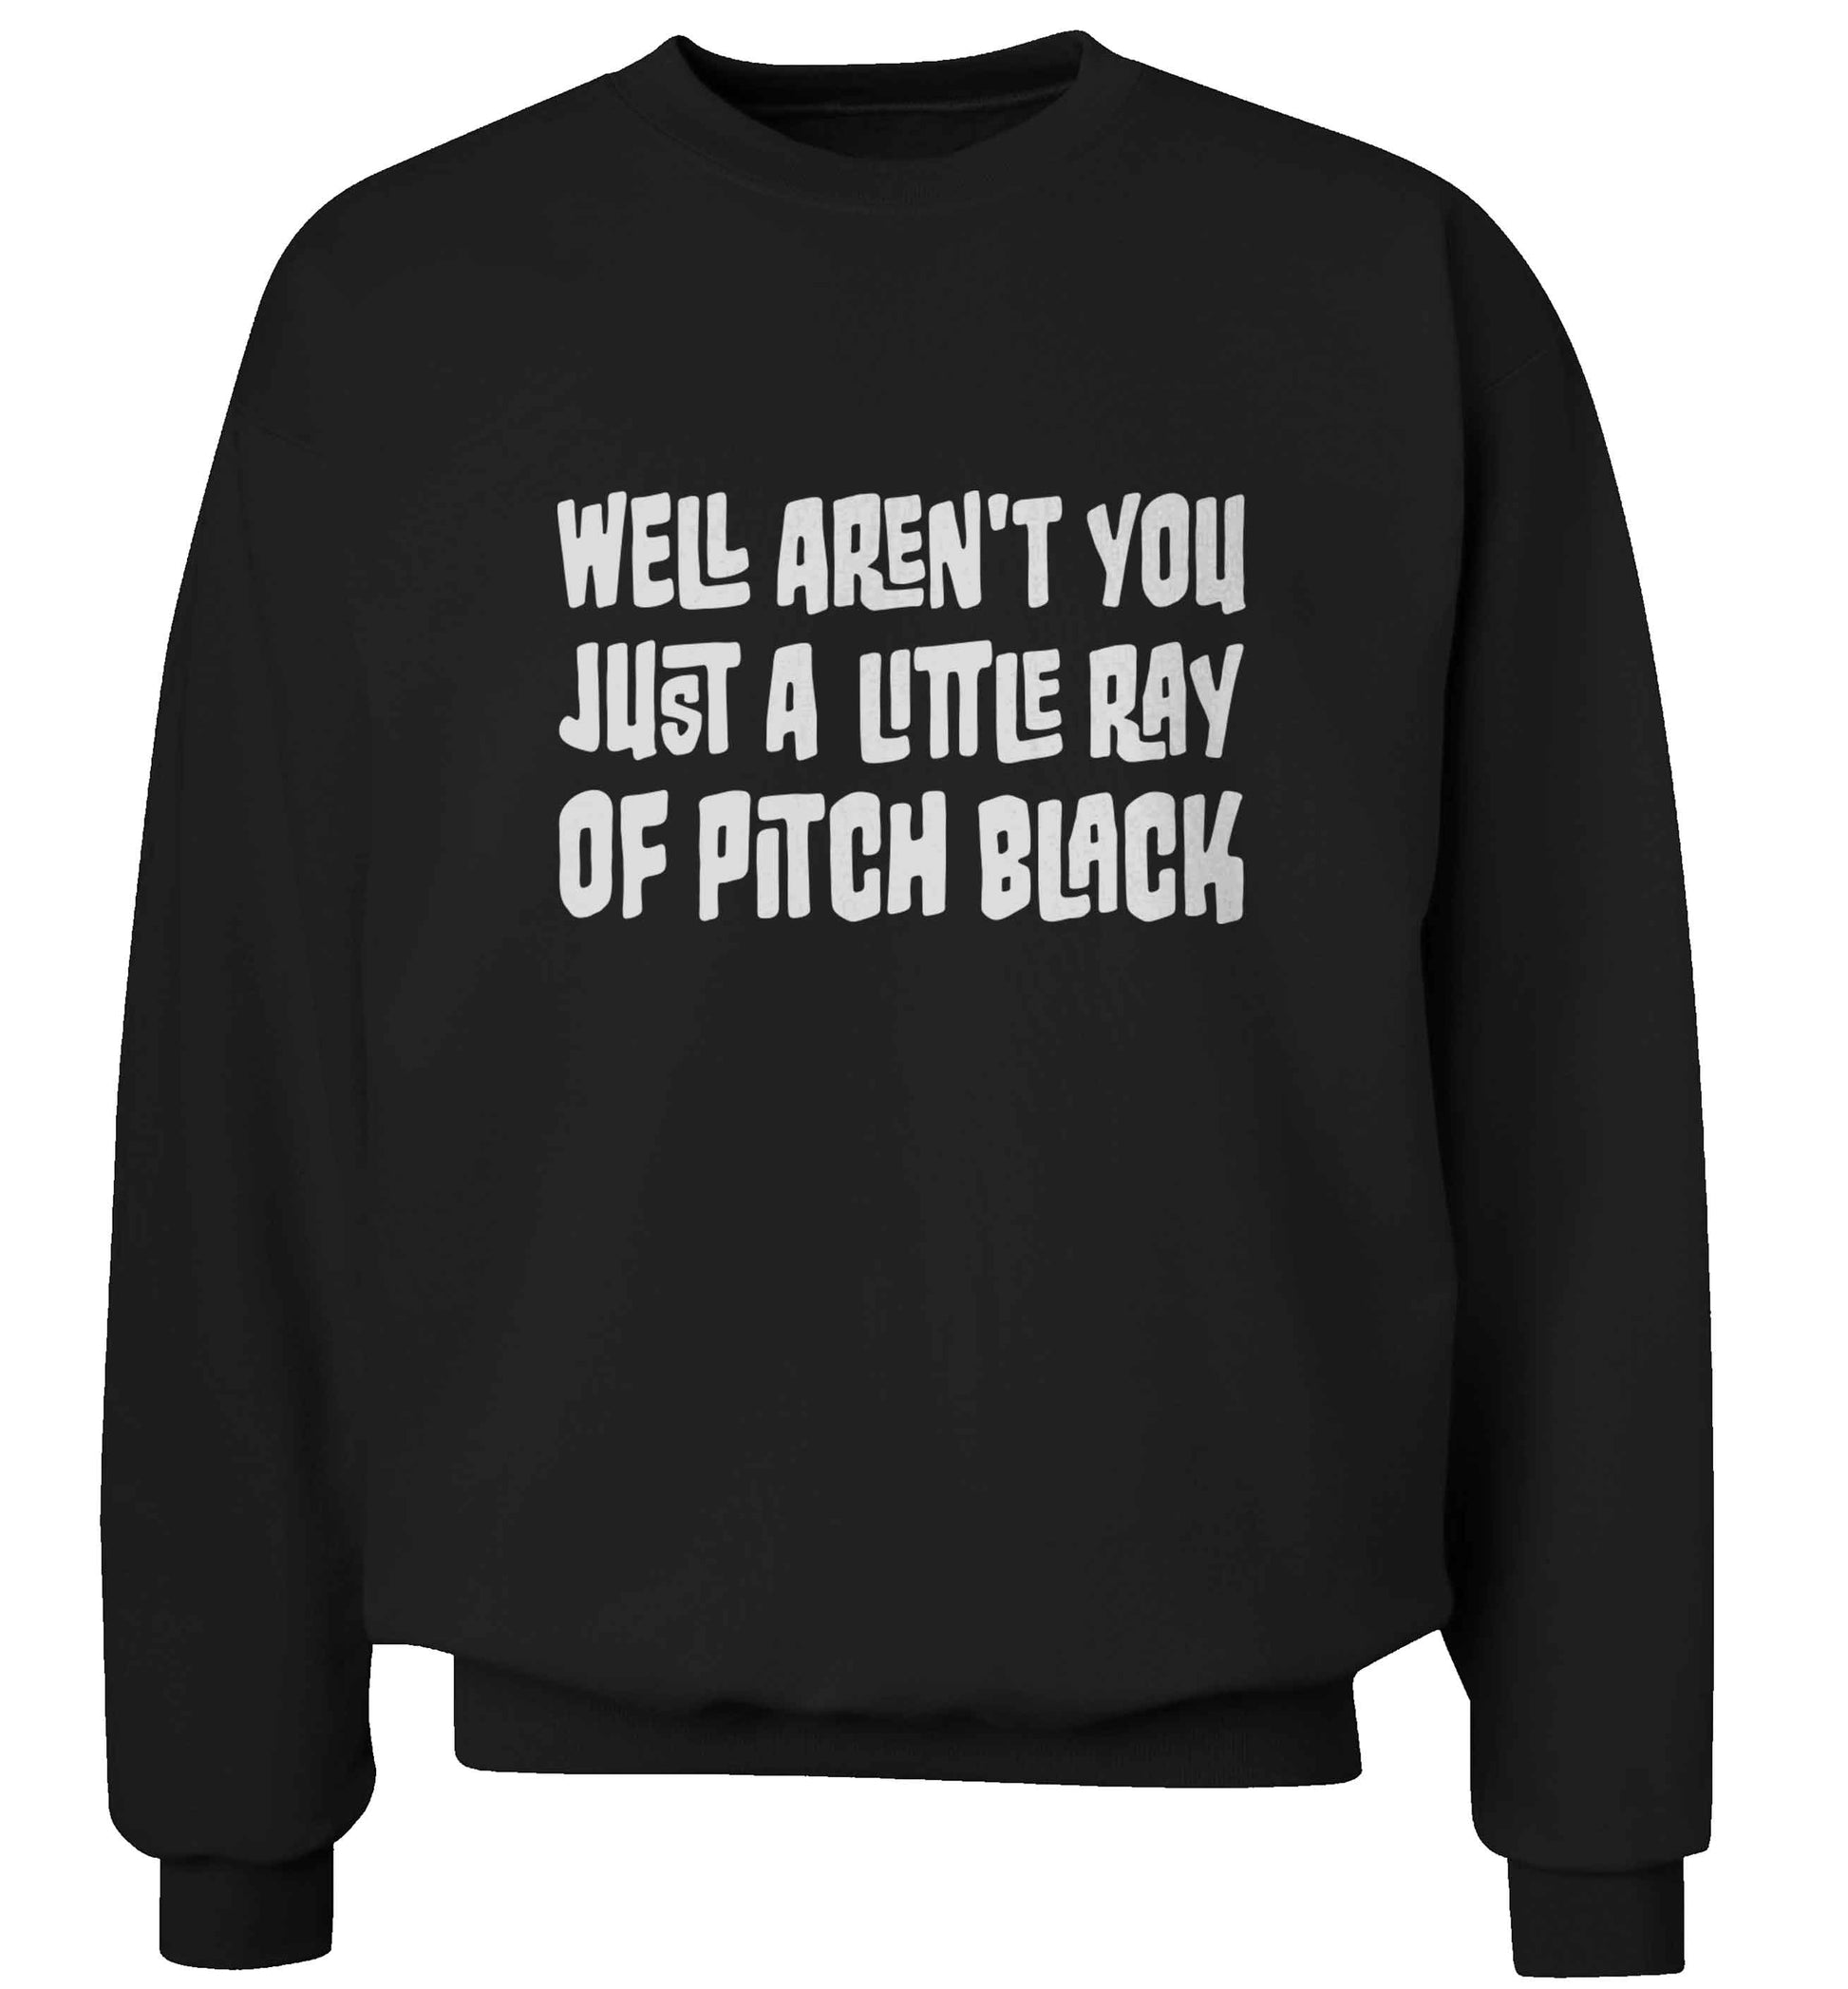 Well aren't you just a little ray of pitch black Kit adult's unisex black sweater 2XL